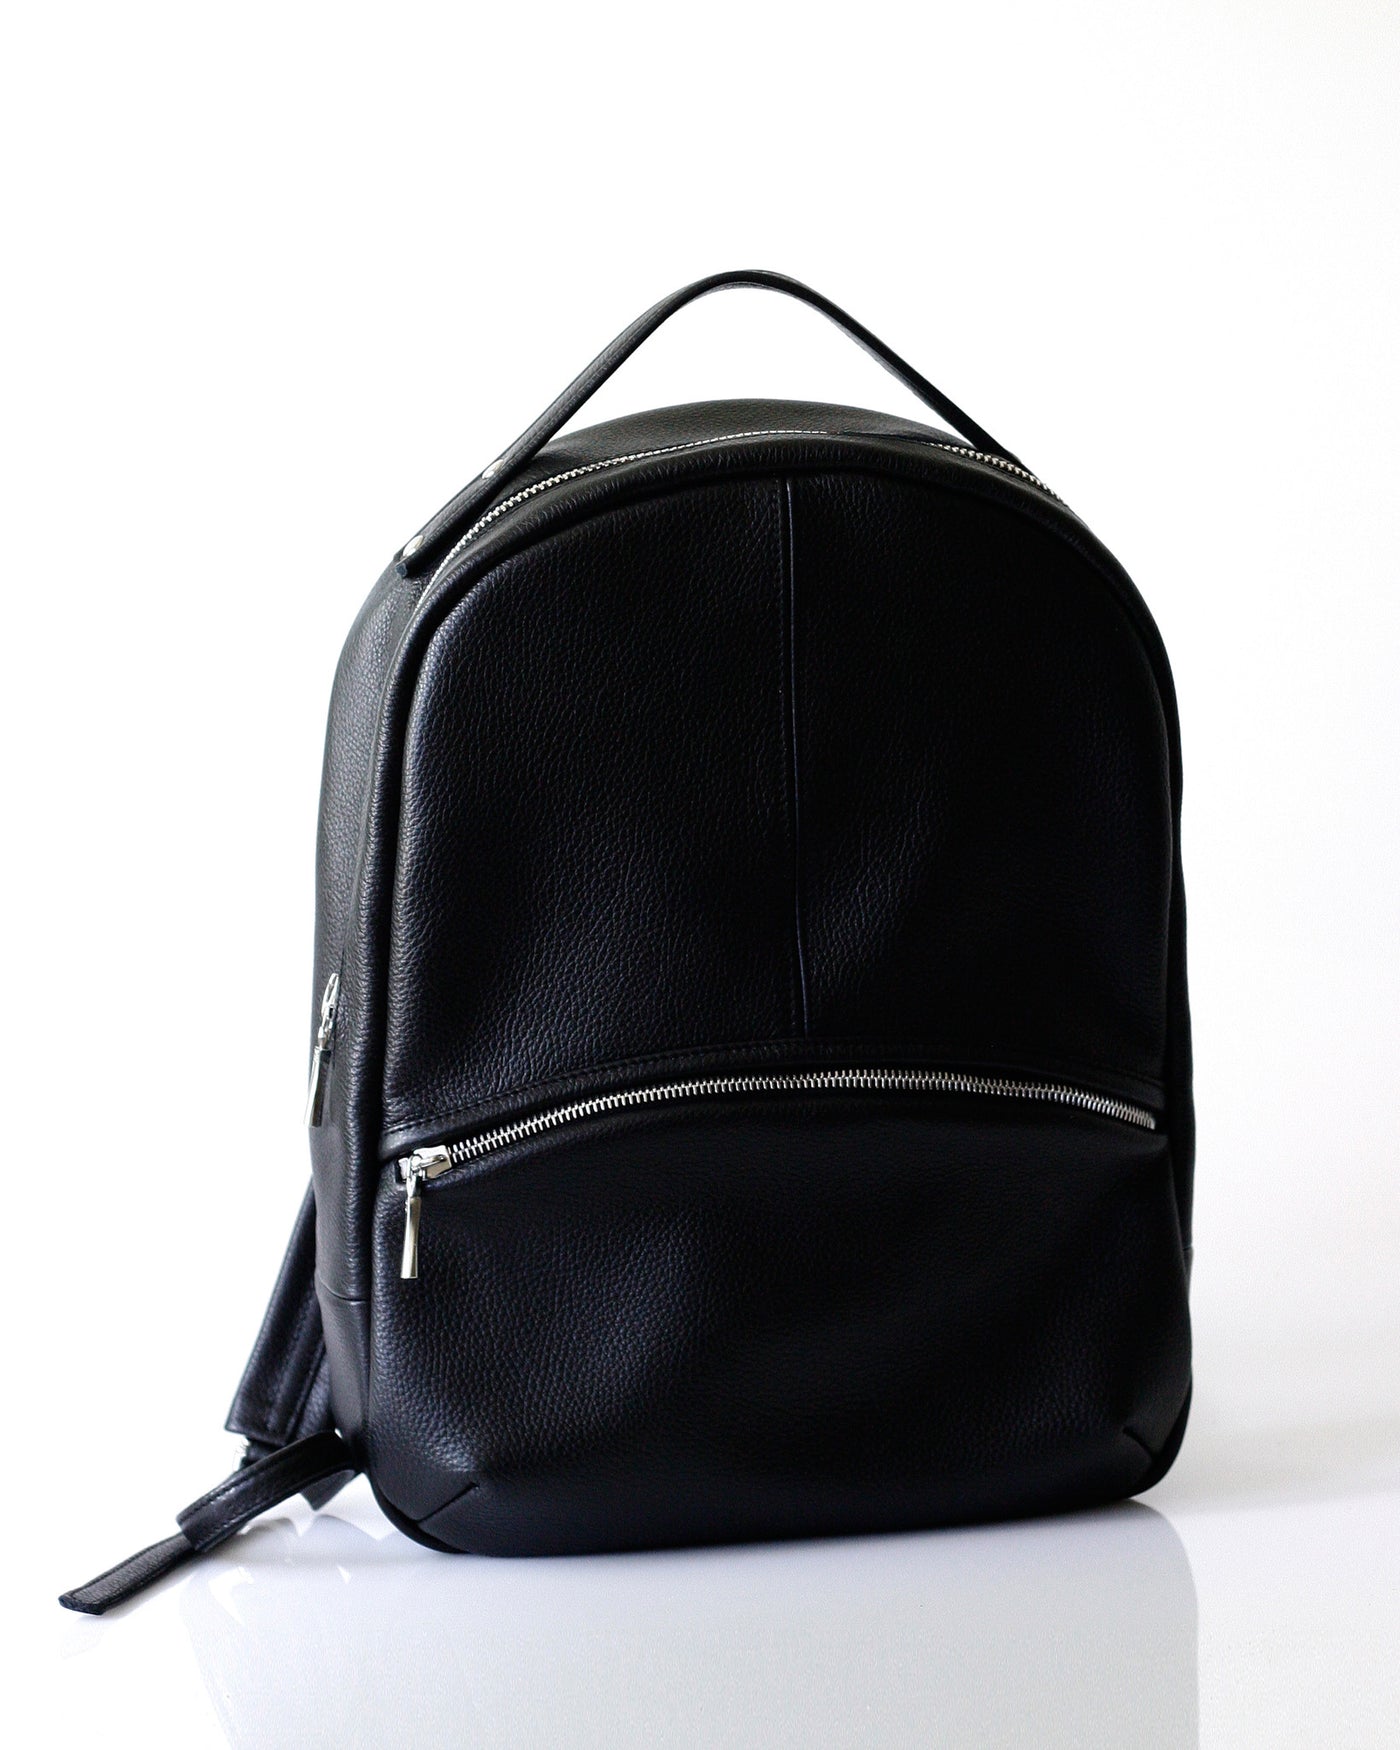 Kanye Backpack - Opelle bag Permanent Collection - Opelle leather handbag handcrafted leather bag toronto Canada